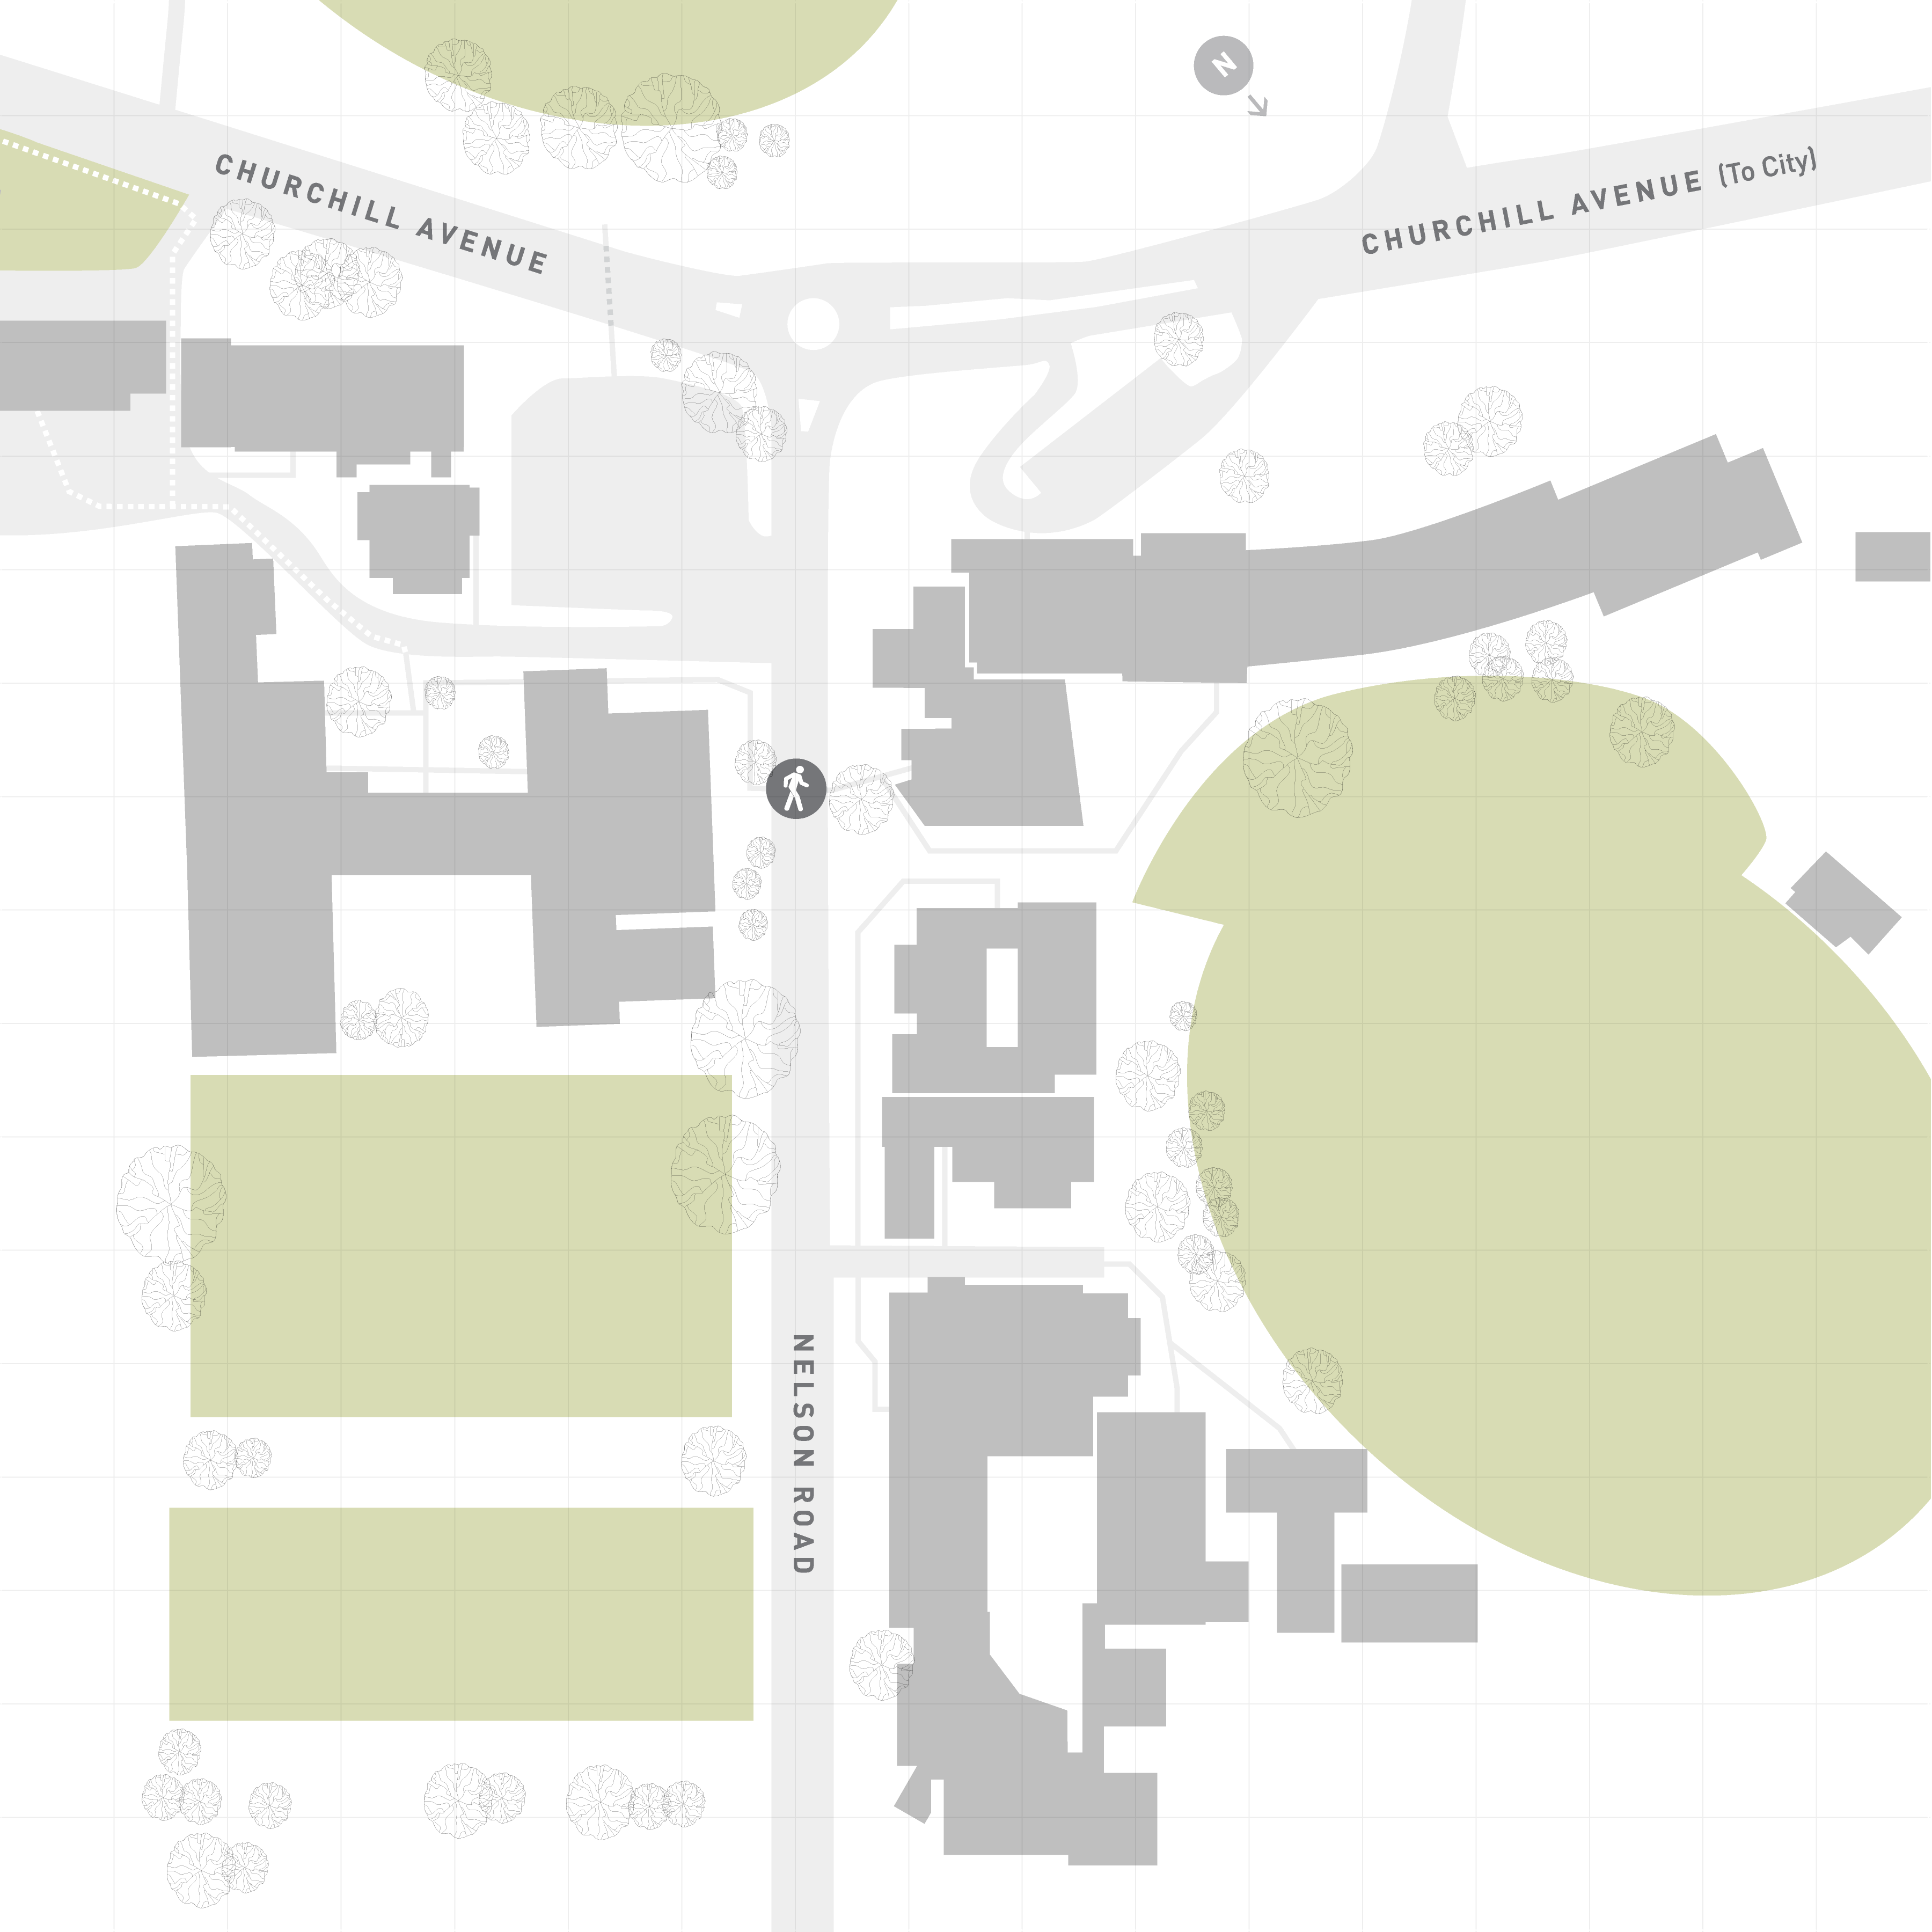 The Hutchins School campus base map